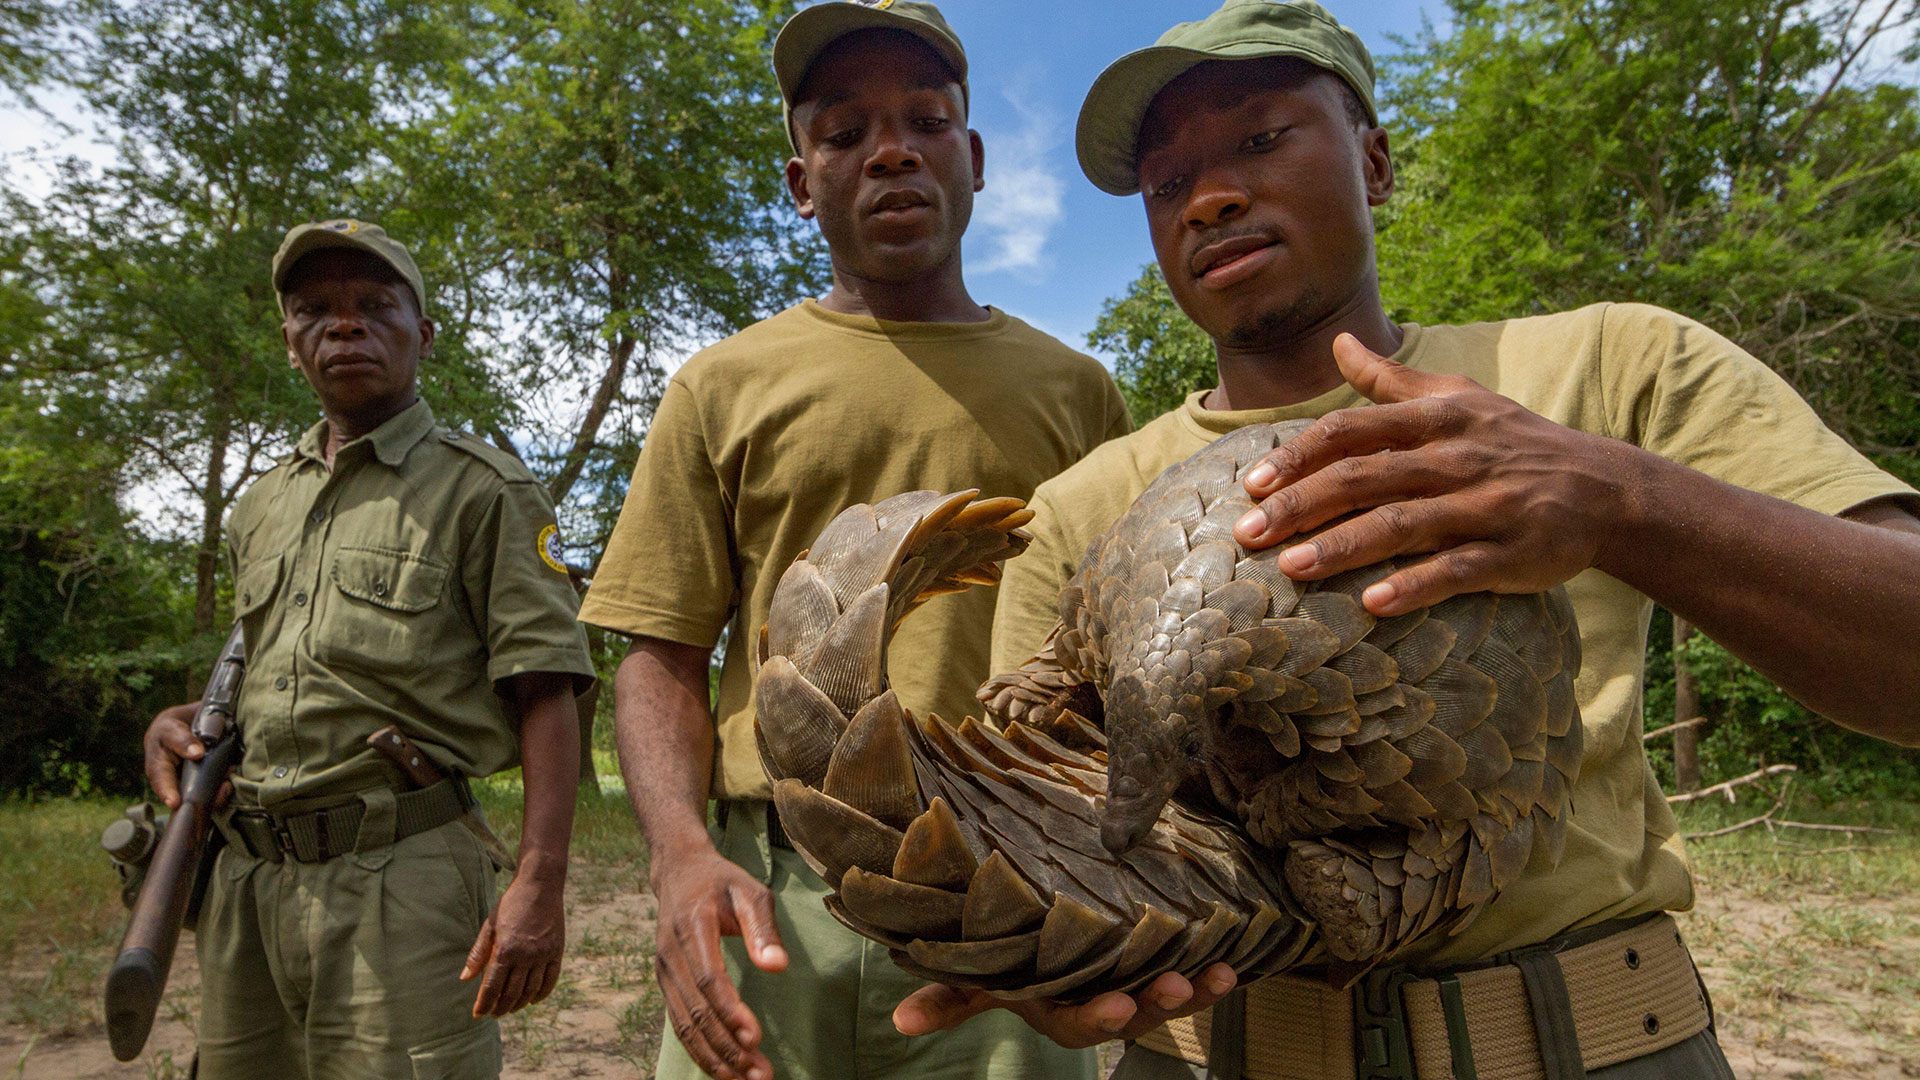 Rangers with pangolin in Gorongosa National Park, Mozambique